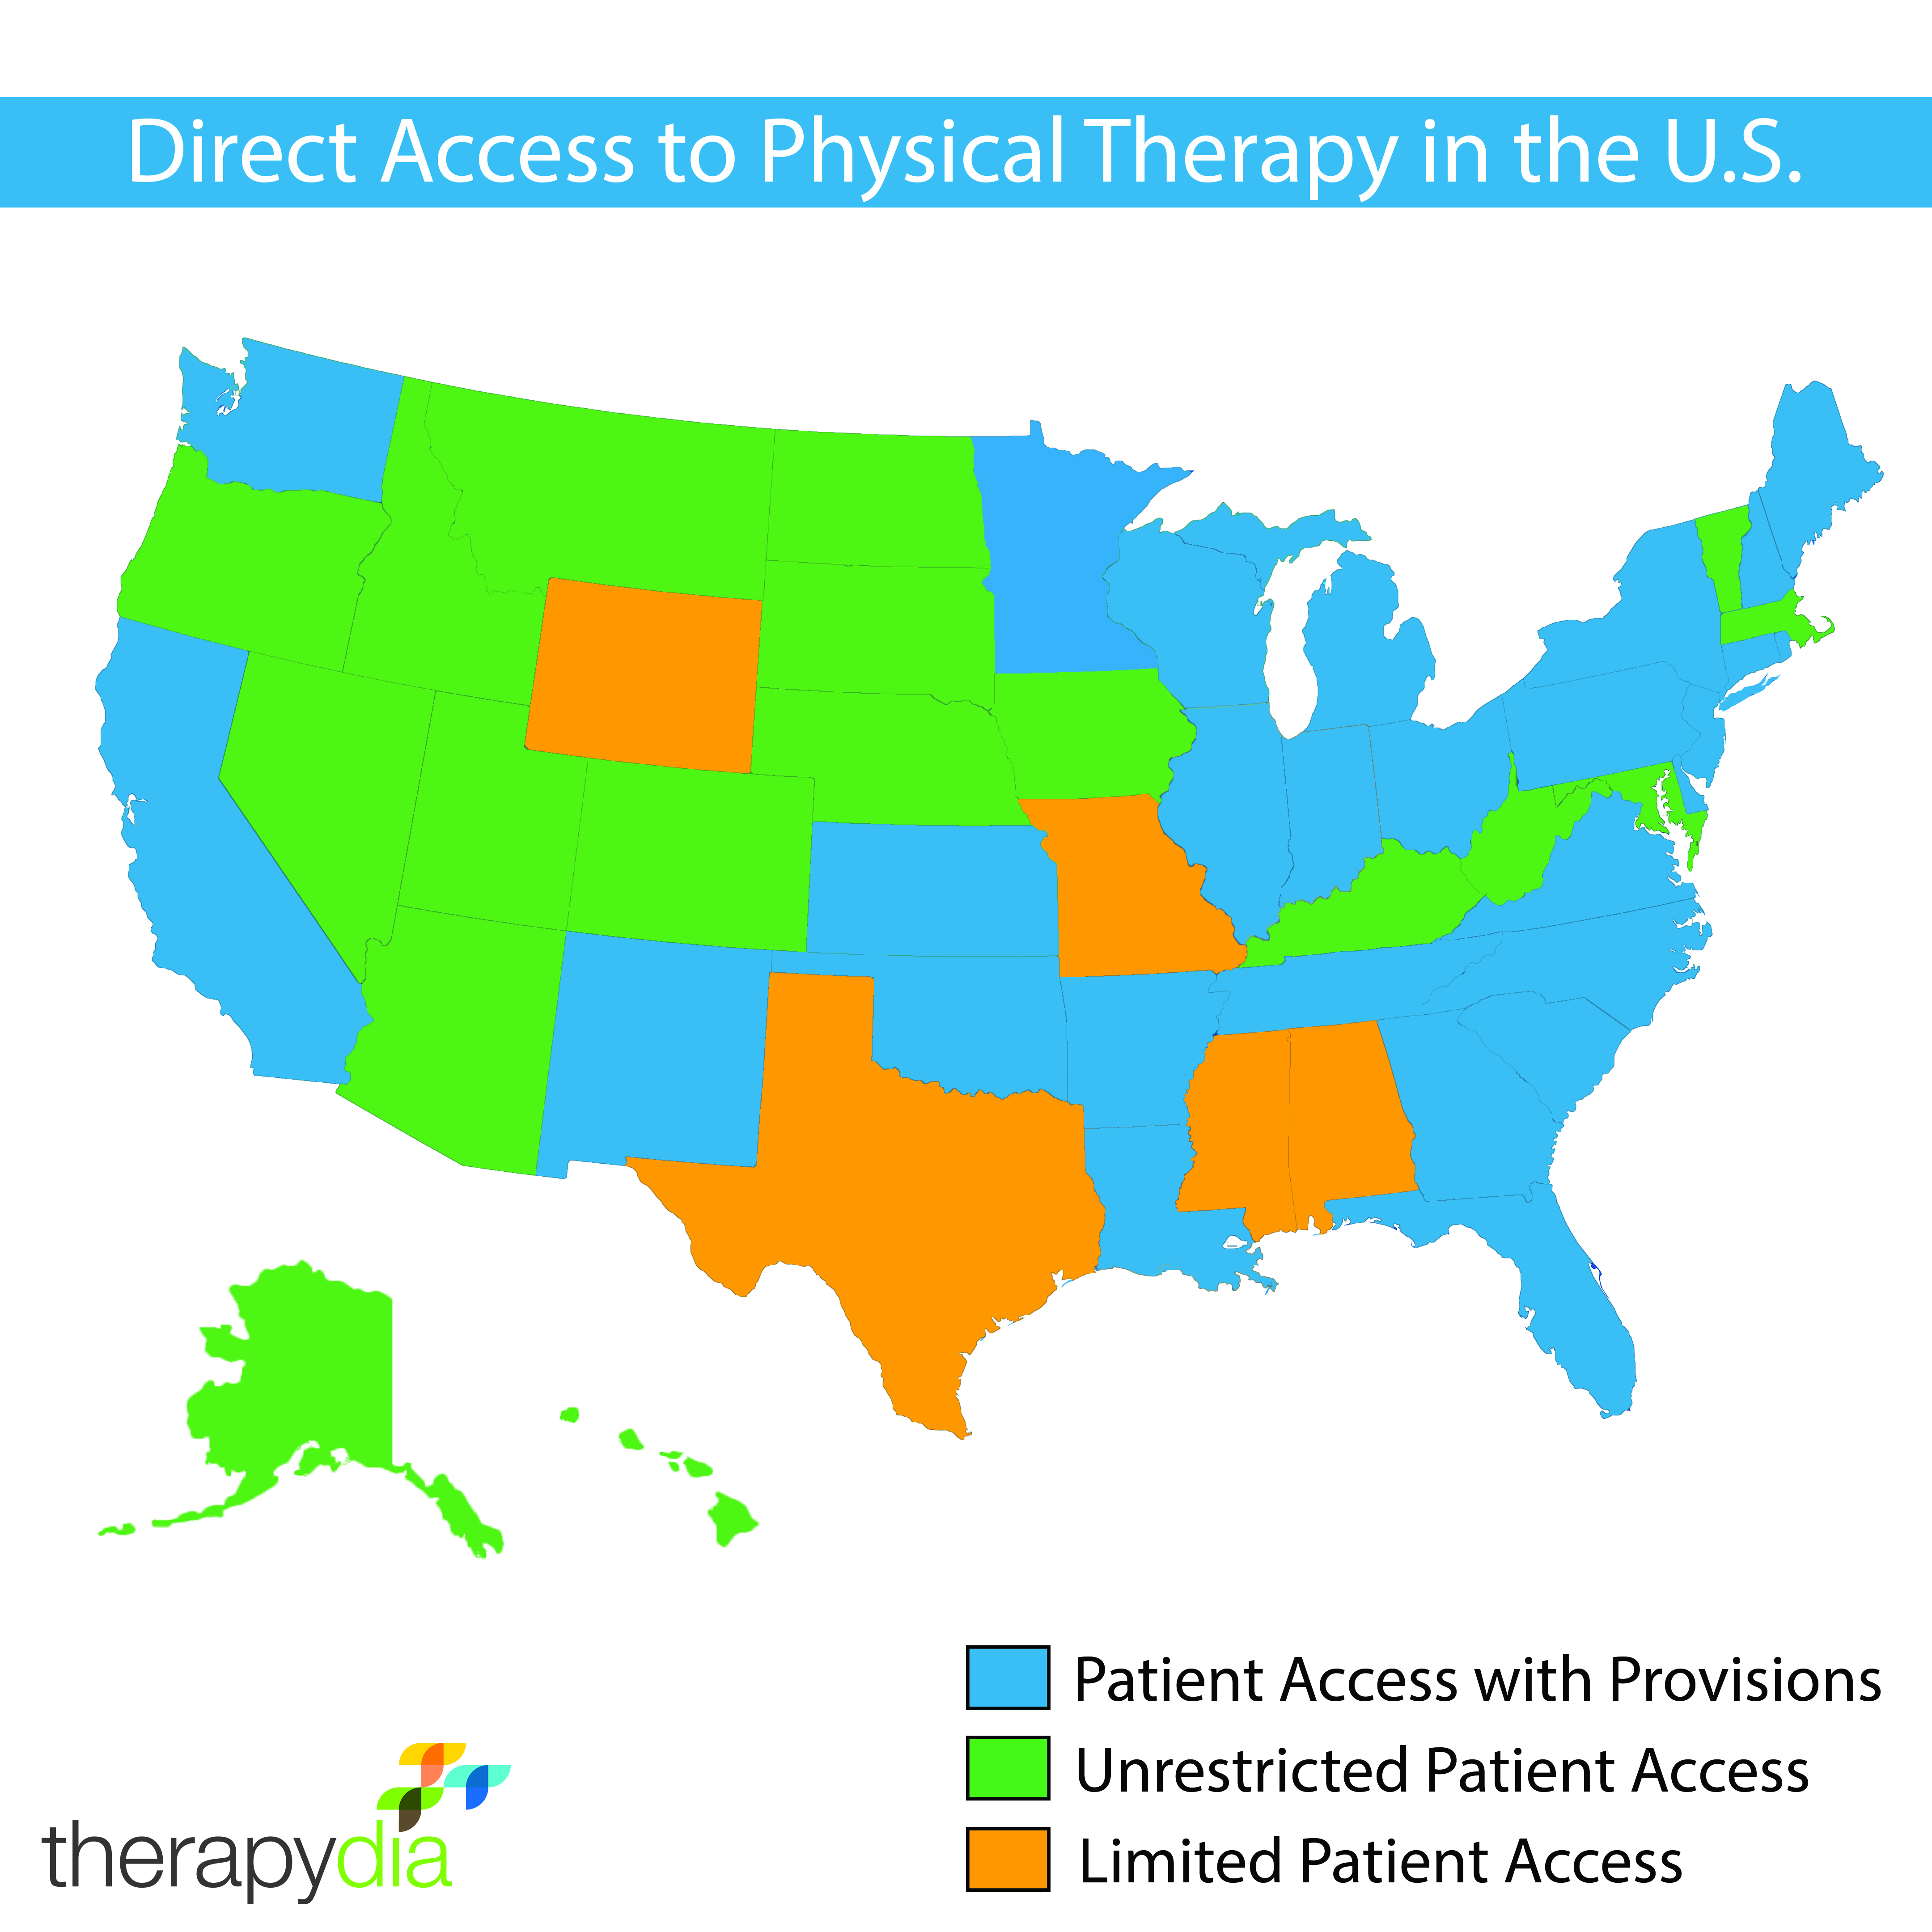 Direct Access to Physical Therapy in the U.S.